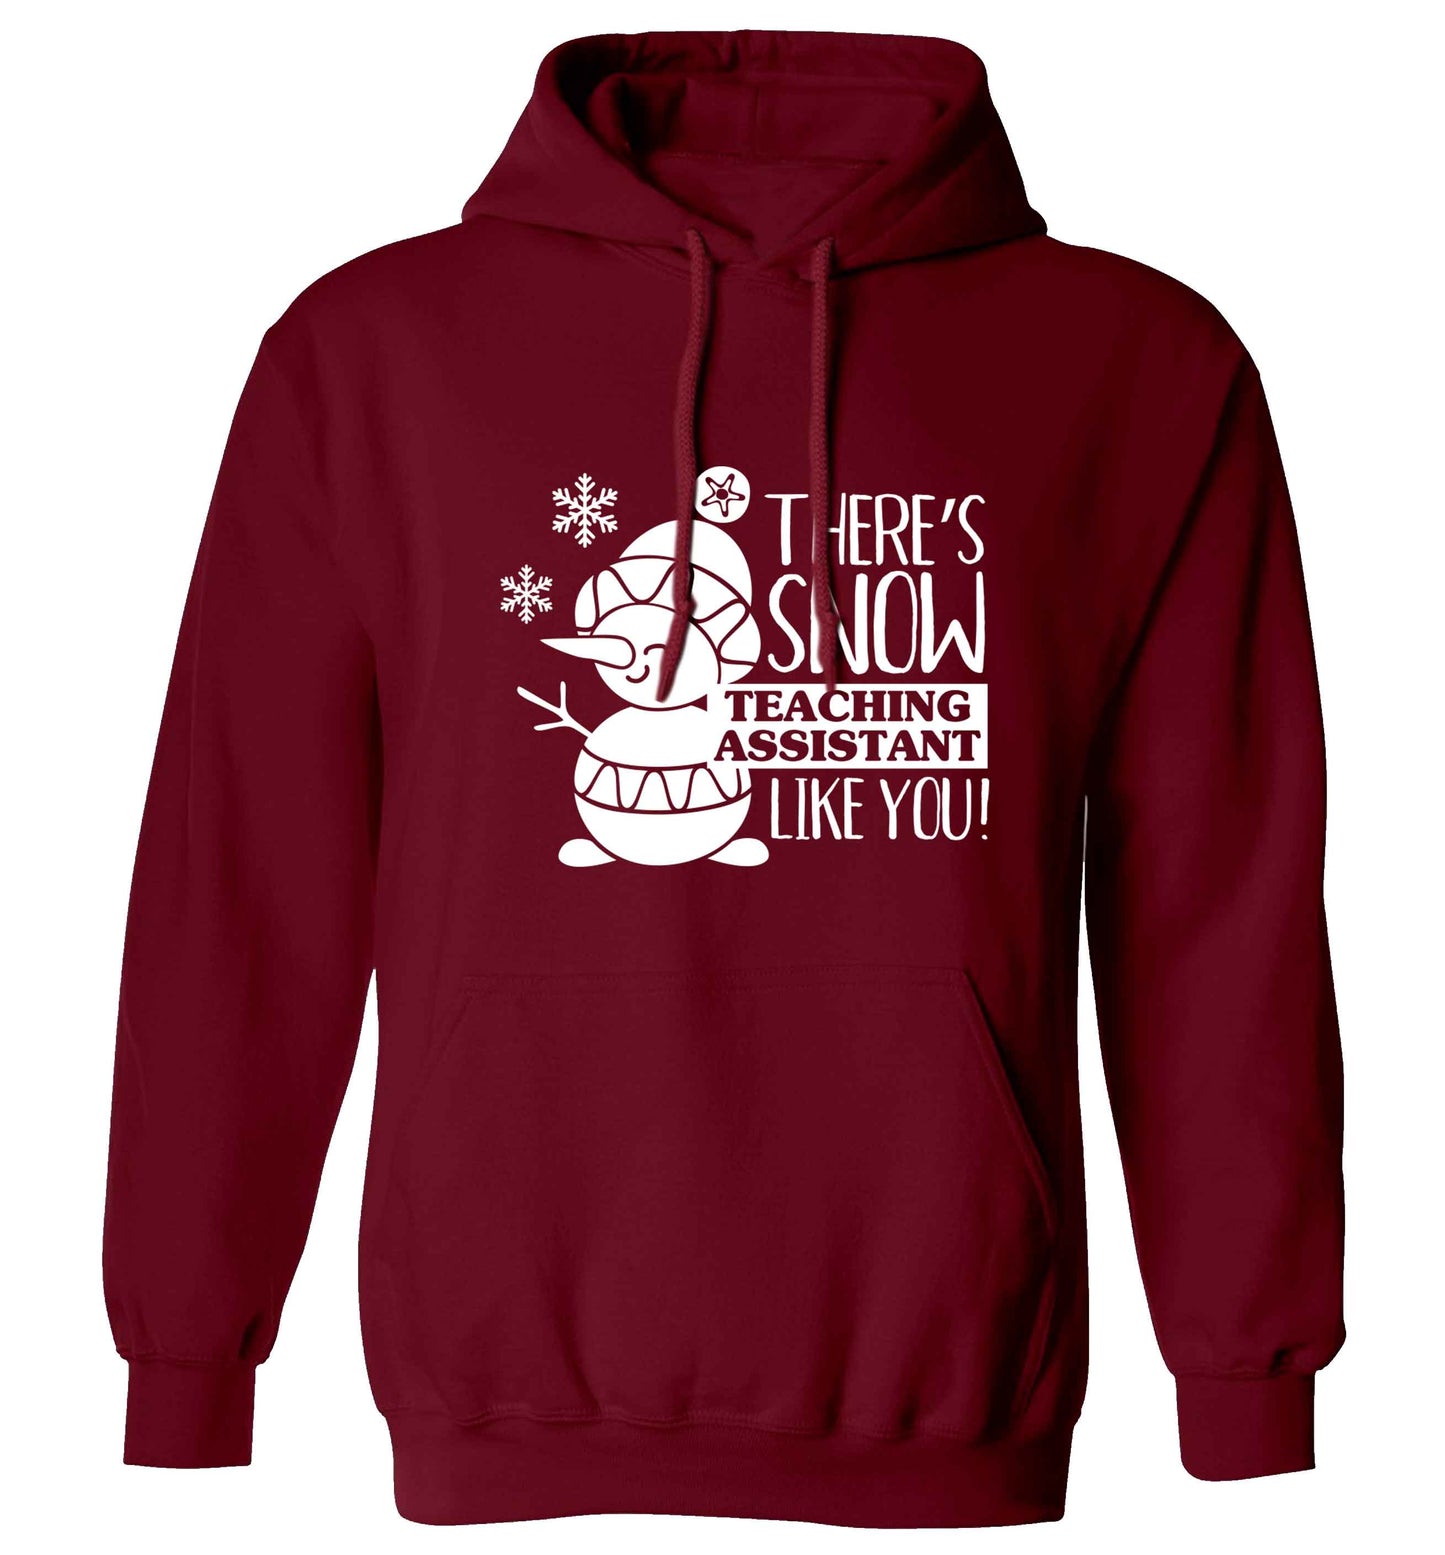 There's snow teaching assistant like you adults unisex maroon hoodie 2XL